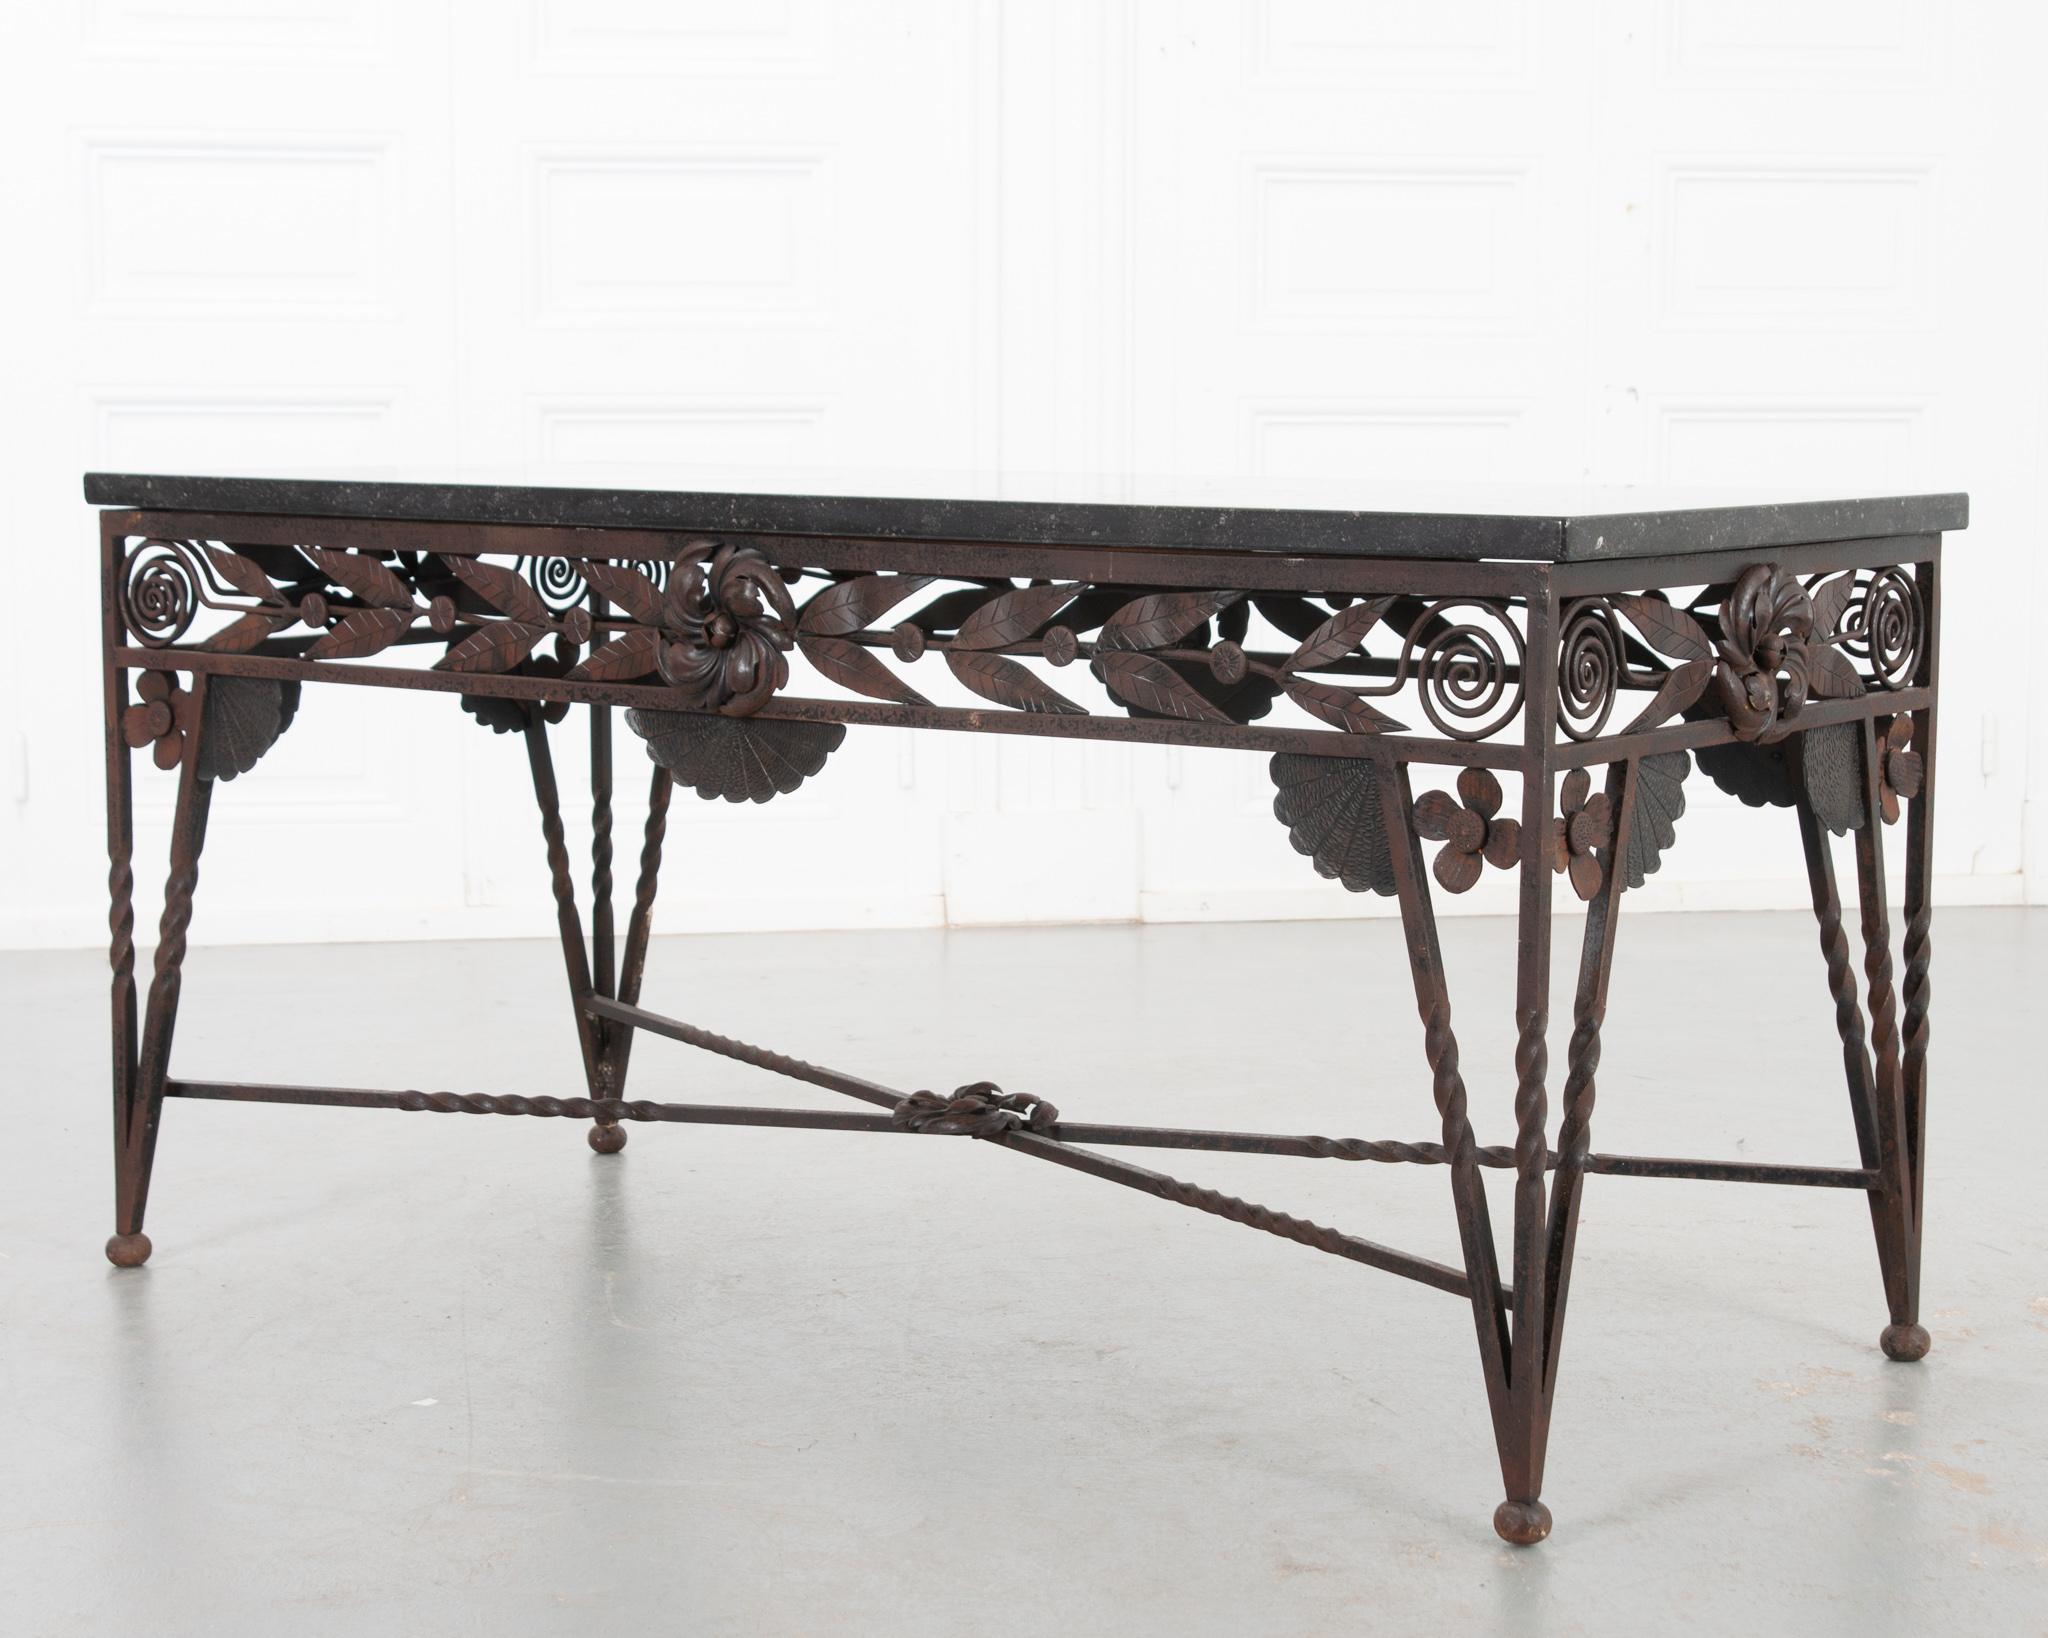 A stunning Art Deco cocktail table from 20th Century France. The black, fossil marble top is removable and sits perfectly on its symmetrical iron base. Each side features large center flowers, flanked by detailed leaves that swirl tightly into each